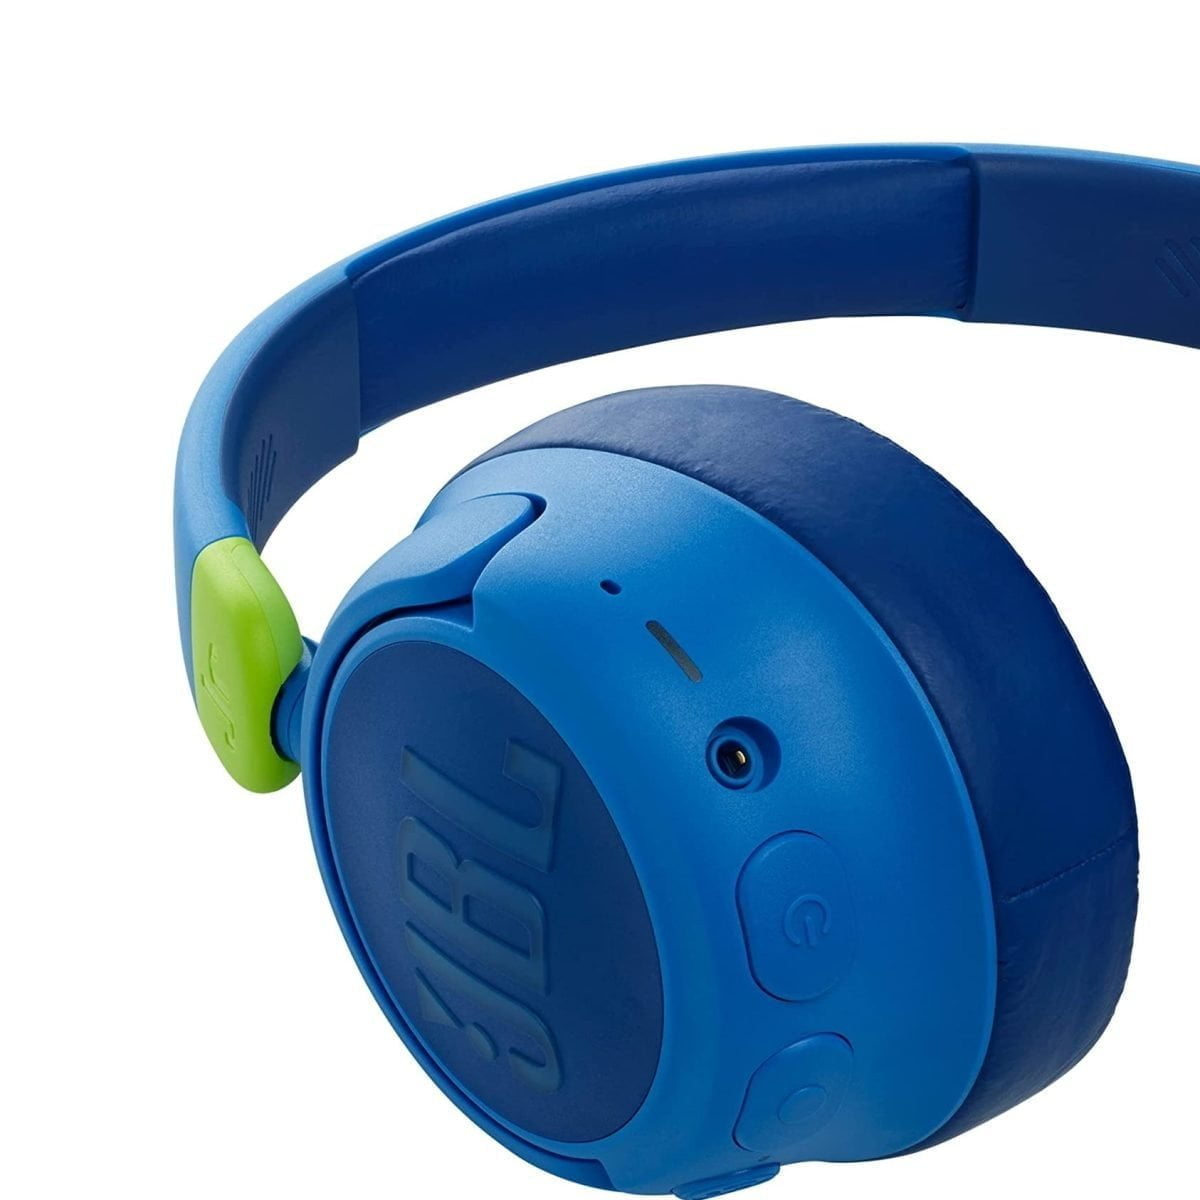 71Pescceaql. Ac Sl1500 Jbl &Lt;H1&Gt;Jbl Jr460Nc On-Ear Wireless Headphones For Kids, Blue&Lt;/H1&Gt;
Https://Www.youtube.com/Watch?V=Mdaicwkv4Pg Quality Sound Has No Age, But You Want To Be Sure Your Kids Are Safe While Having Fun. With A Maximum Volume Set Under 85Db, They’re Free To Enjoy Jbl Quality Sound, Safely. Shut Out All That Noise And Distraction With Active Noise Cancelling. Your Kids Can Stay Focused Whether They’re Listening To Music, Enjoying Their Favorite Show Or Learning Online. Help Your Kids Stay Connected To The World With The Built-In Mic. They Can Chat Easily With Friends And Family During Downtime, Or Teachers While They’re Busy Learning. Jbl Headphone Jbl Jr460Nc On-Ear Wireless Headphones For Kids, Blue